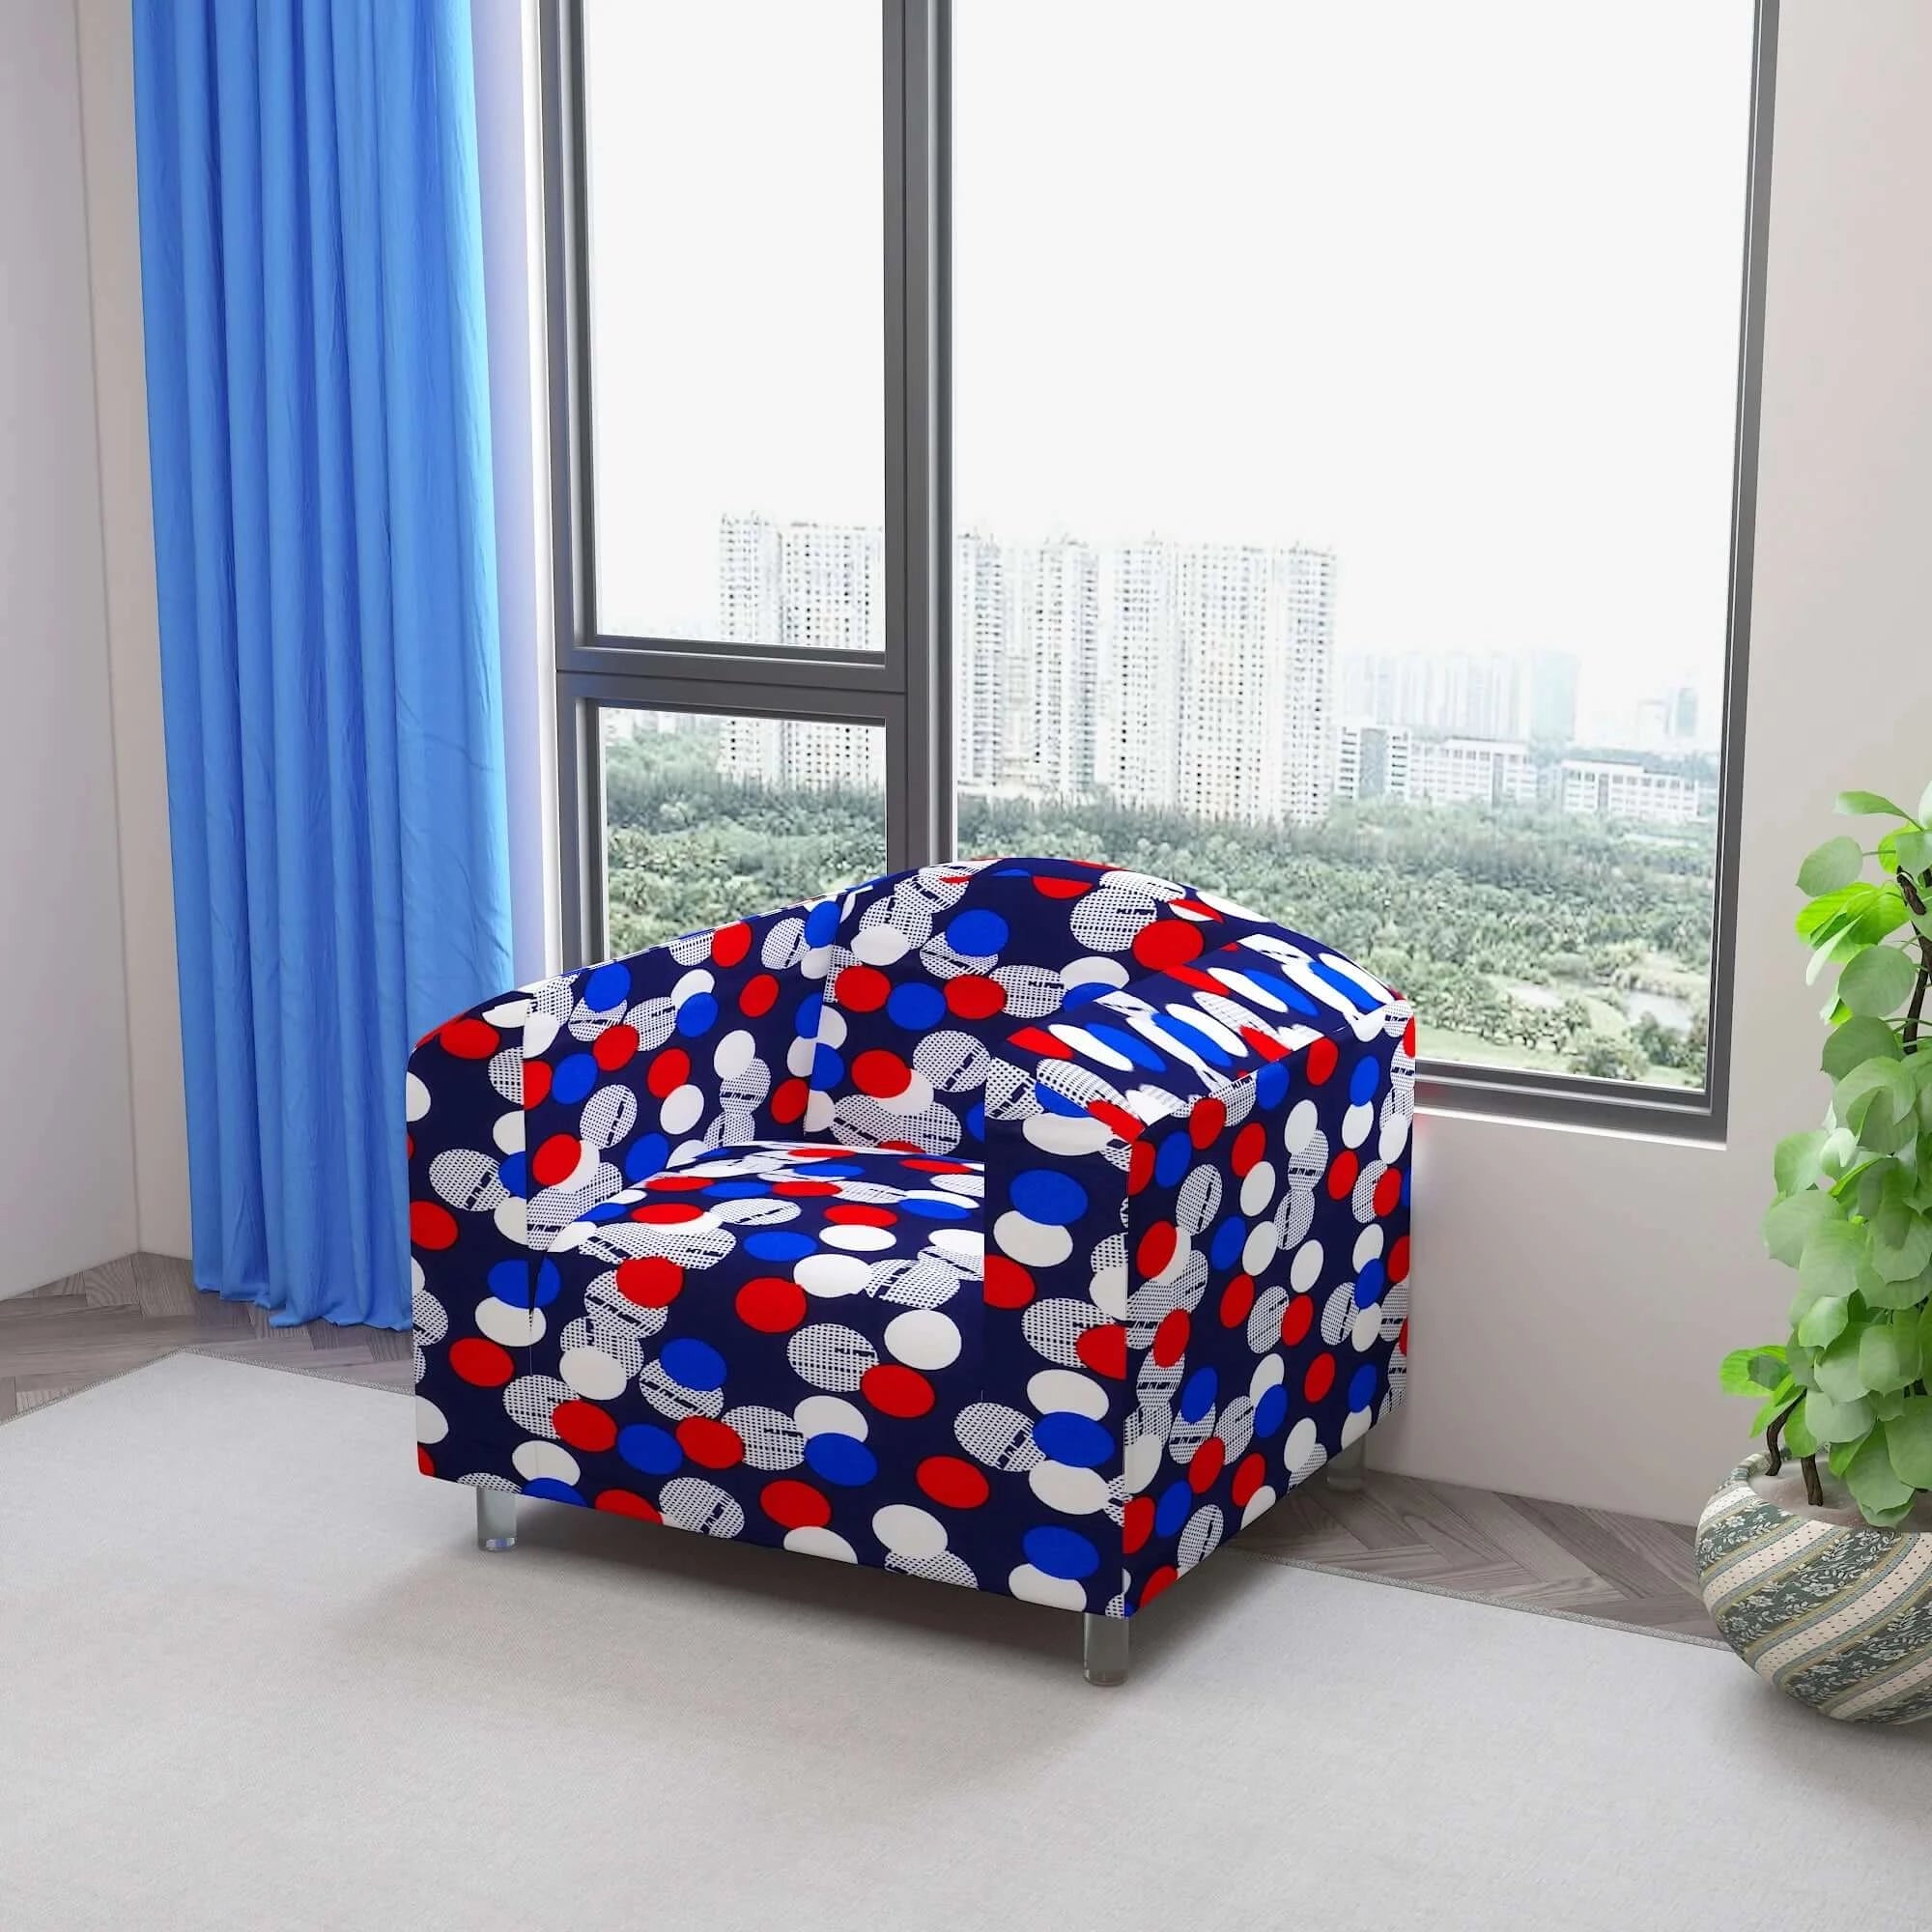 Marigold Printed Sofa Protector Cover Full Stretchable, MG20 - Dream Care Furnishings Private Limited